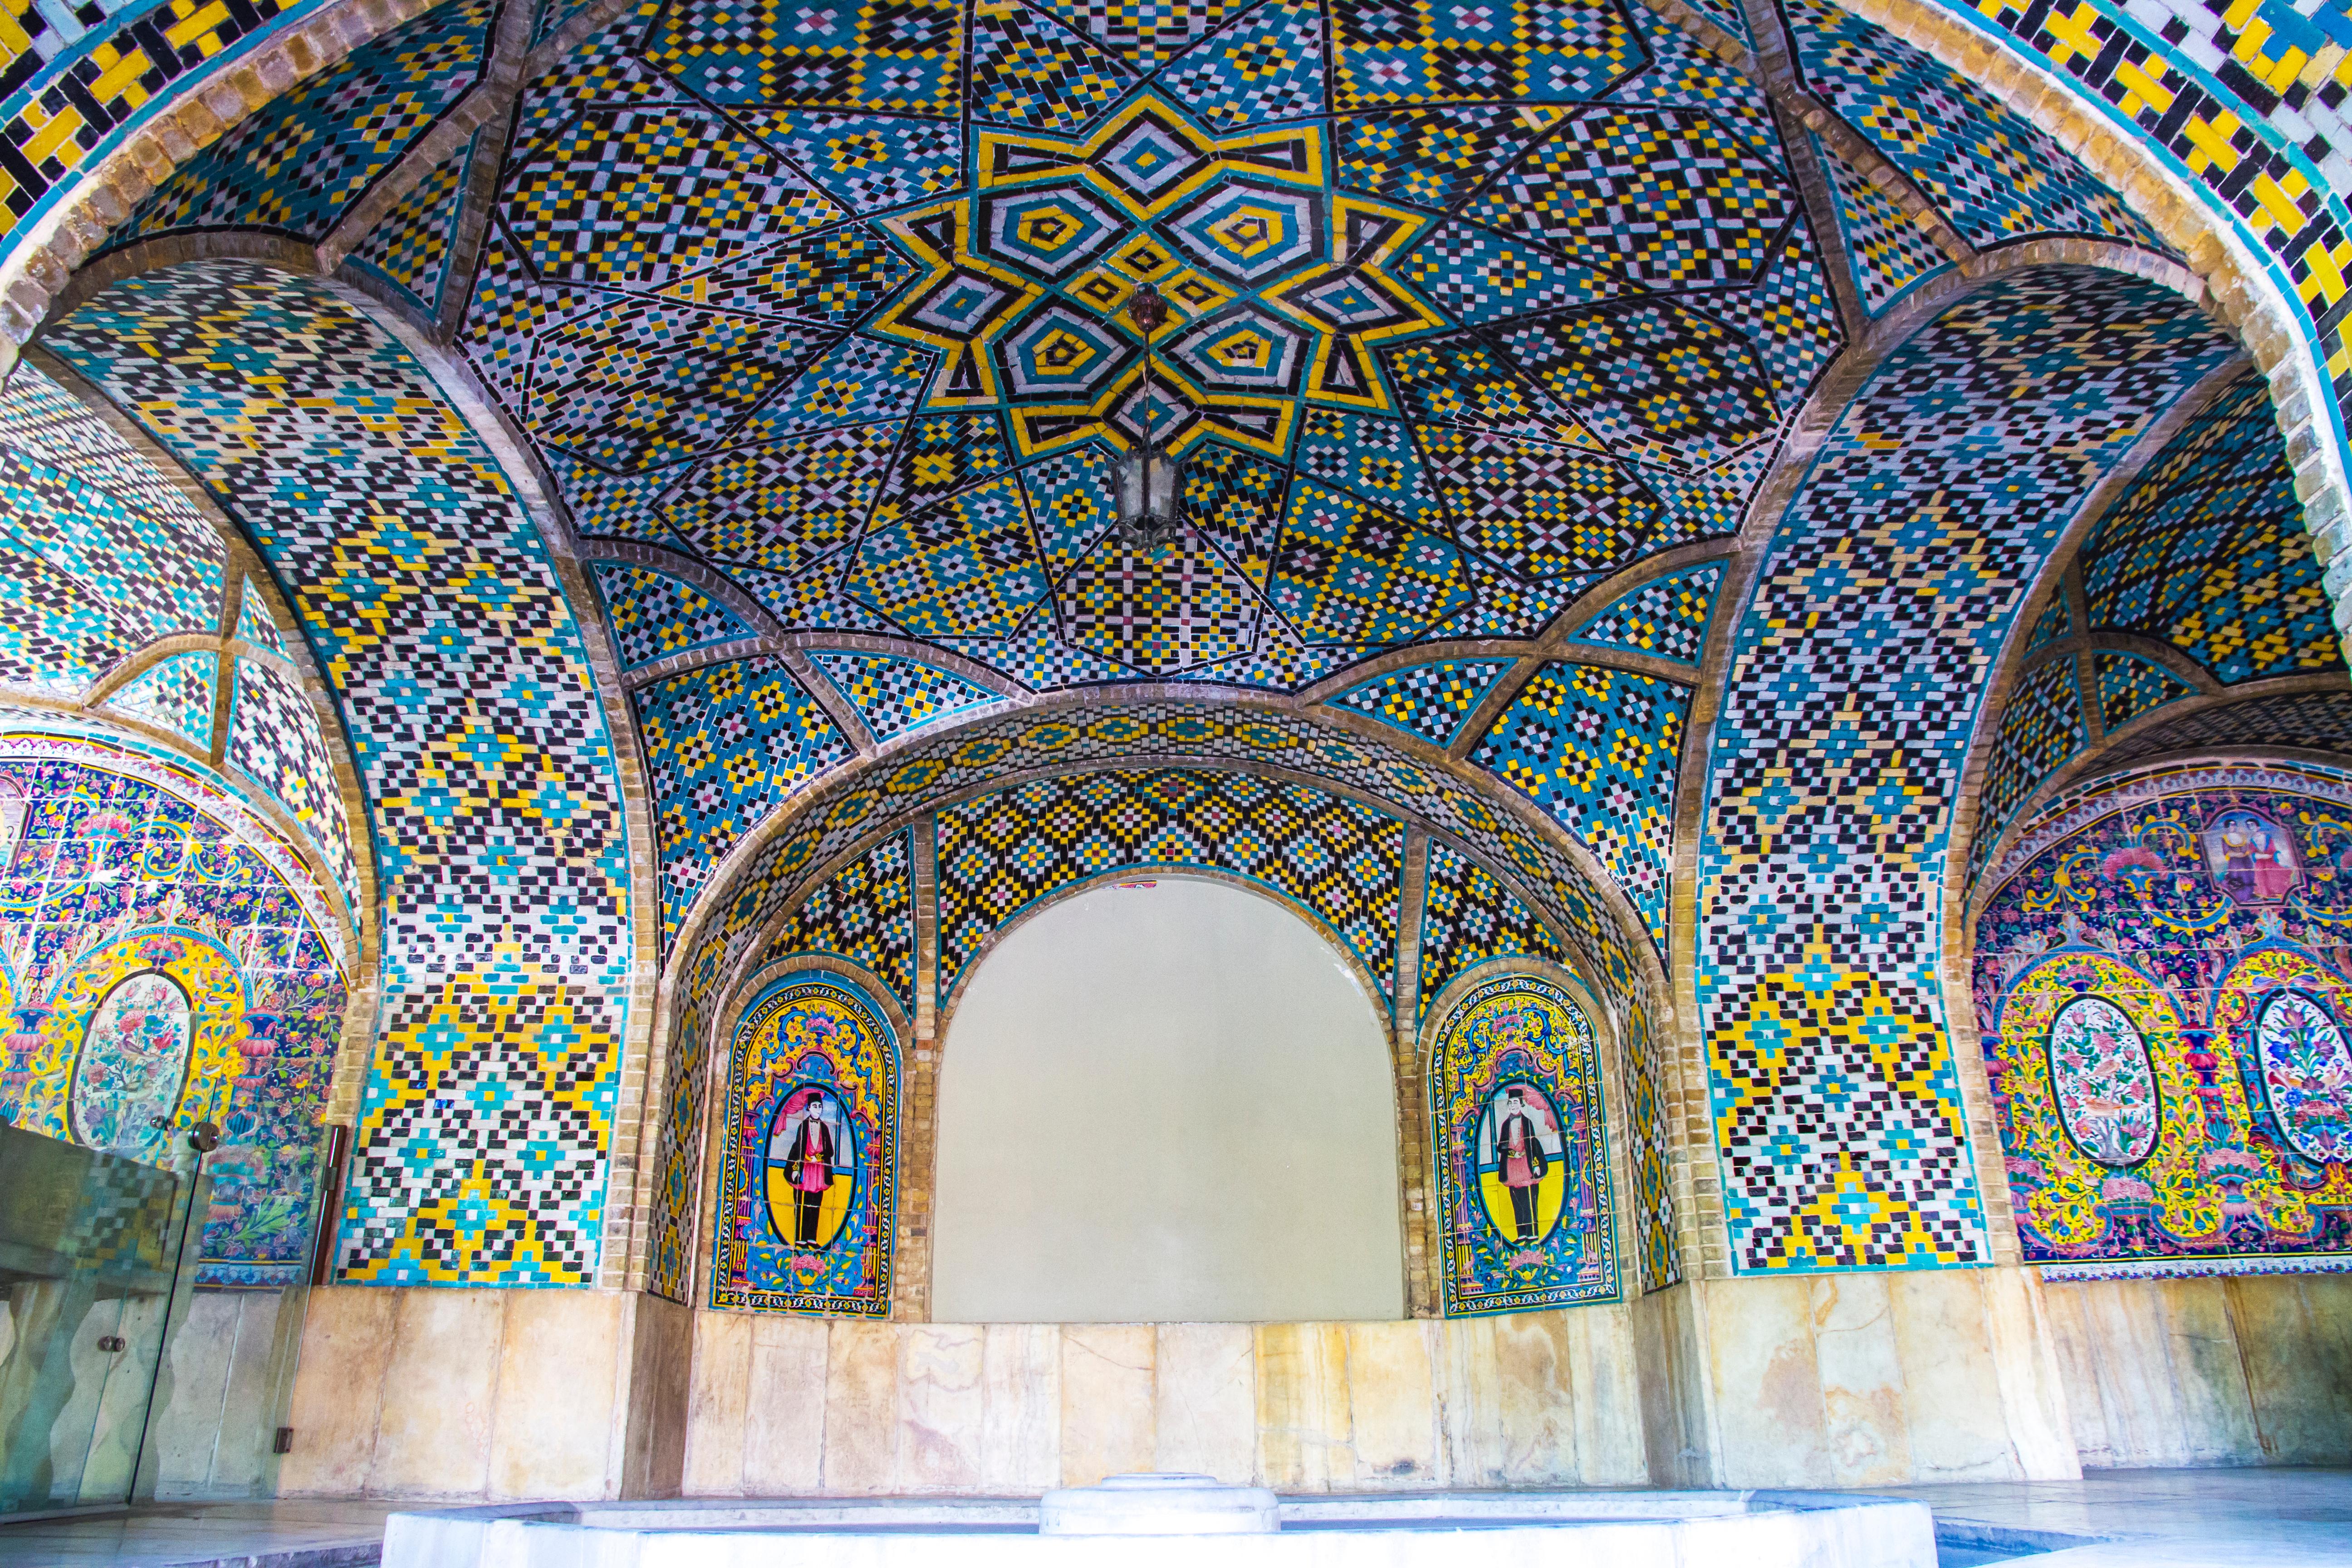 Arched ceiling adorned with colorful tiles at Golestan palace © Whatafoto / Shutterstock